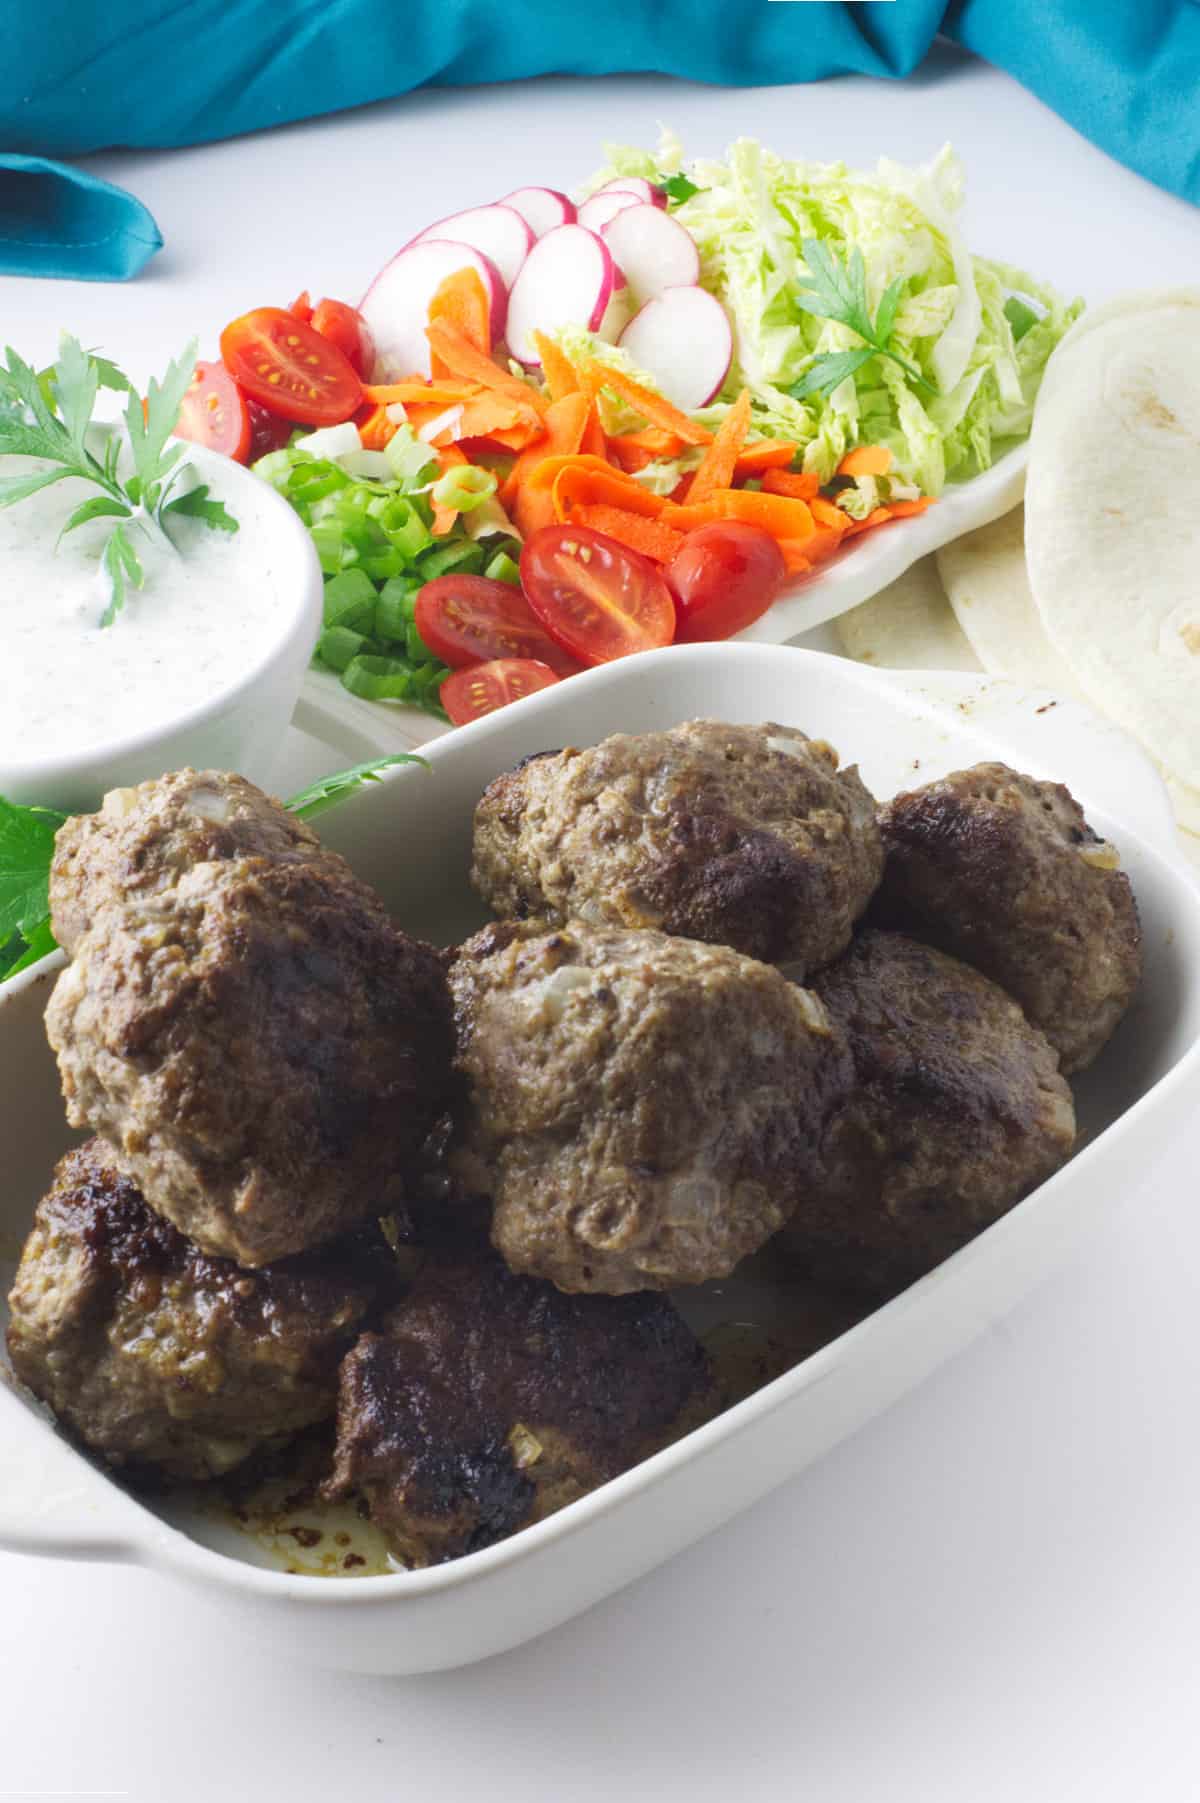 cooked lamb kofta balls in a serving dish with wraps, vegetables, and Tzatziki sauce.